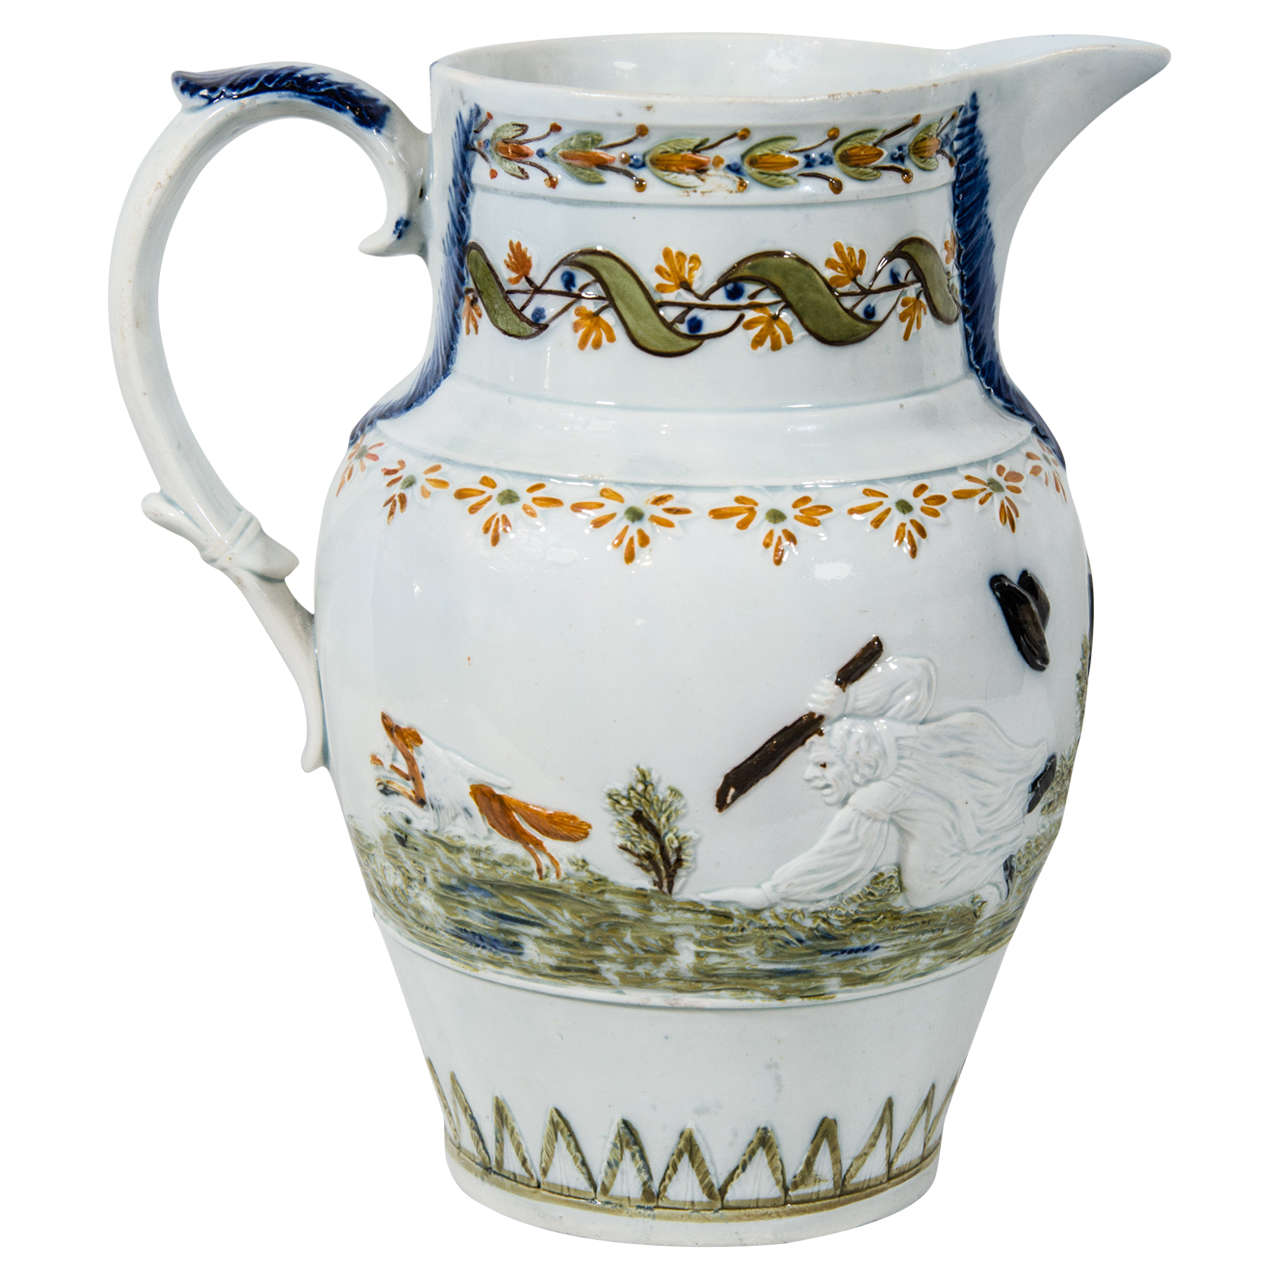 A Prattware jug telling the tale of the old nursery rhyme, “The Fox and The Goose,”. On one side it shows “Old Mother Slipper Slopper unleashing a savage dog, while John stands agape, pitchfork in hand'. The other side of the jug depicts the farmer